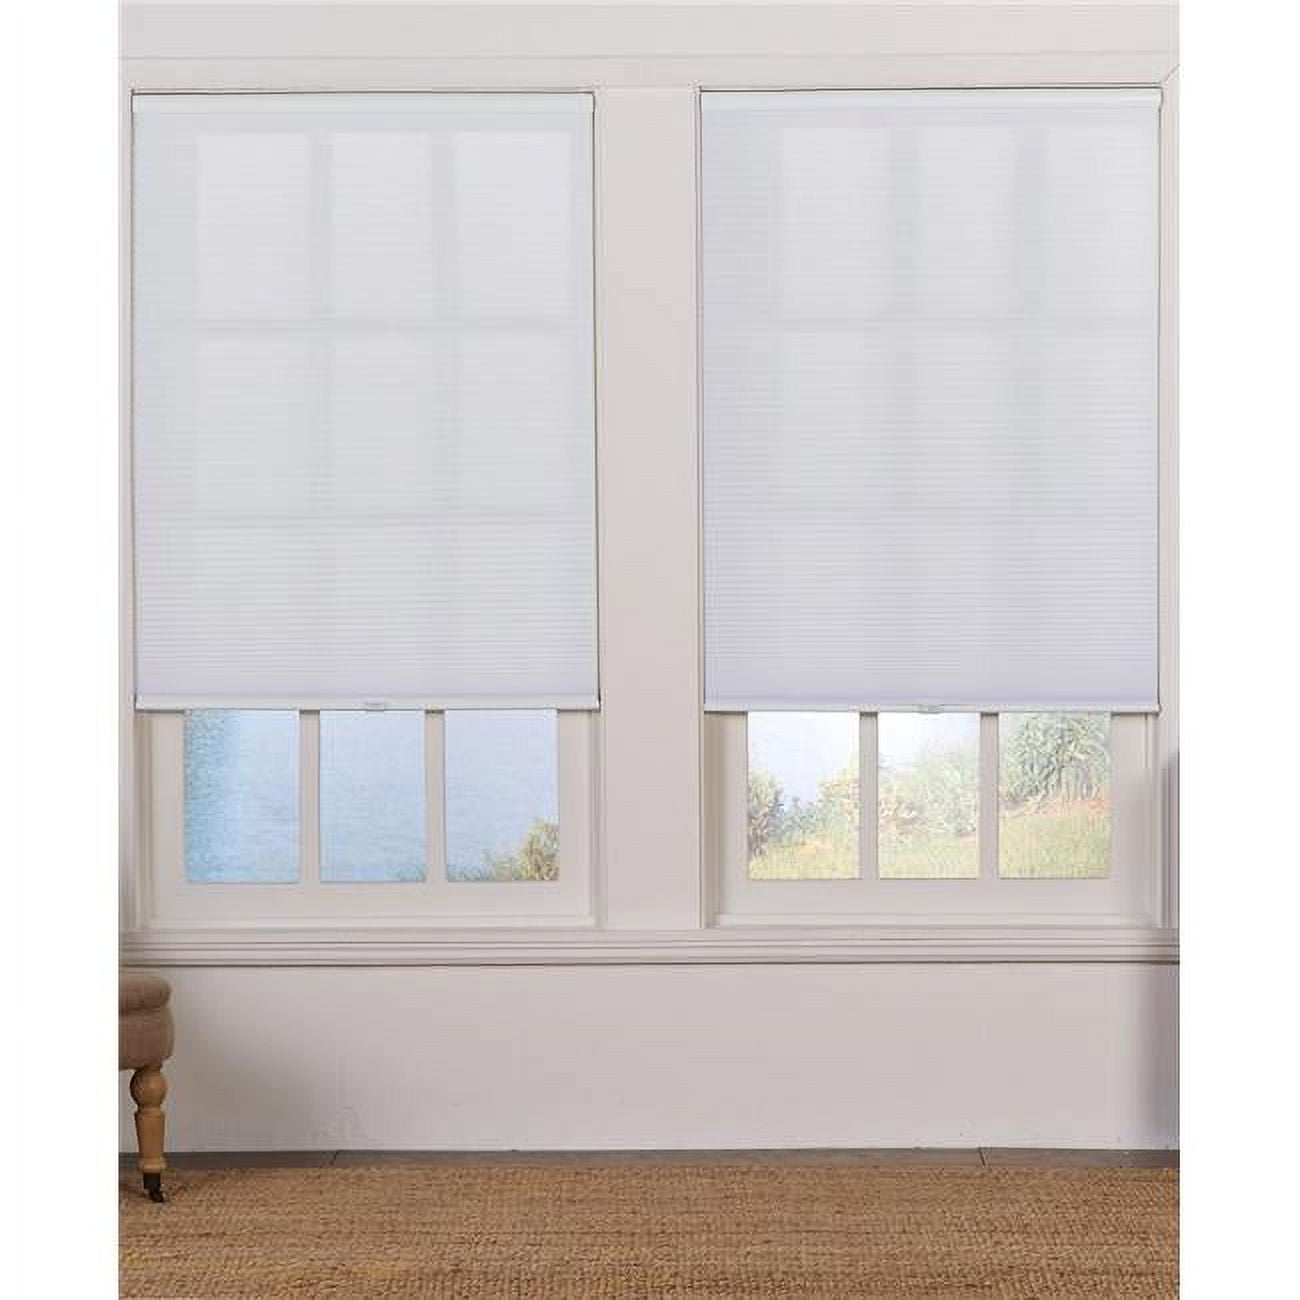 Ubc205x48wt Cordless Light Filtering Cellular Shade, White - 20.5 X 48 In.